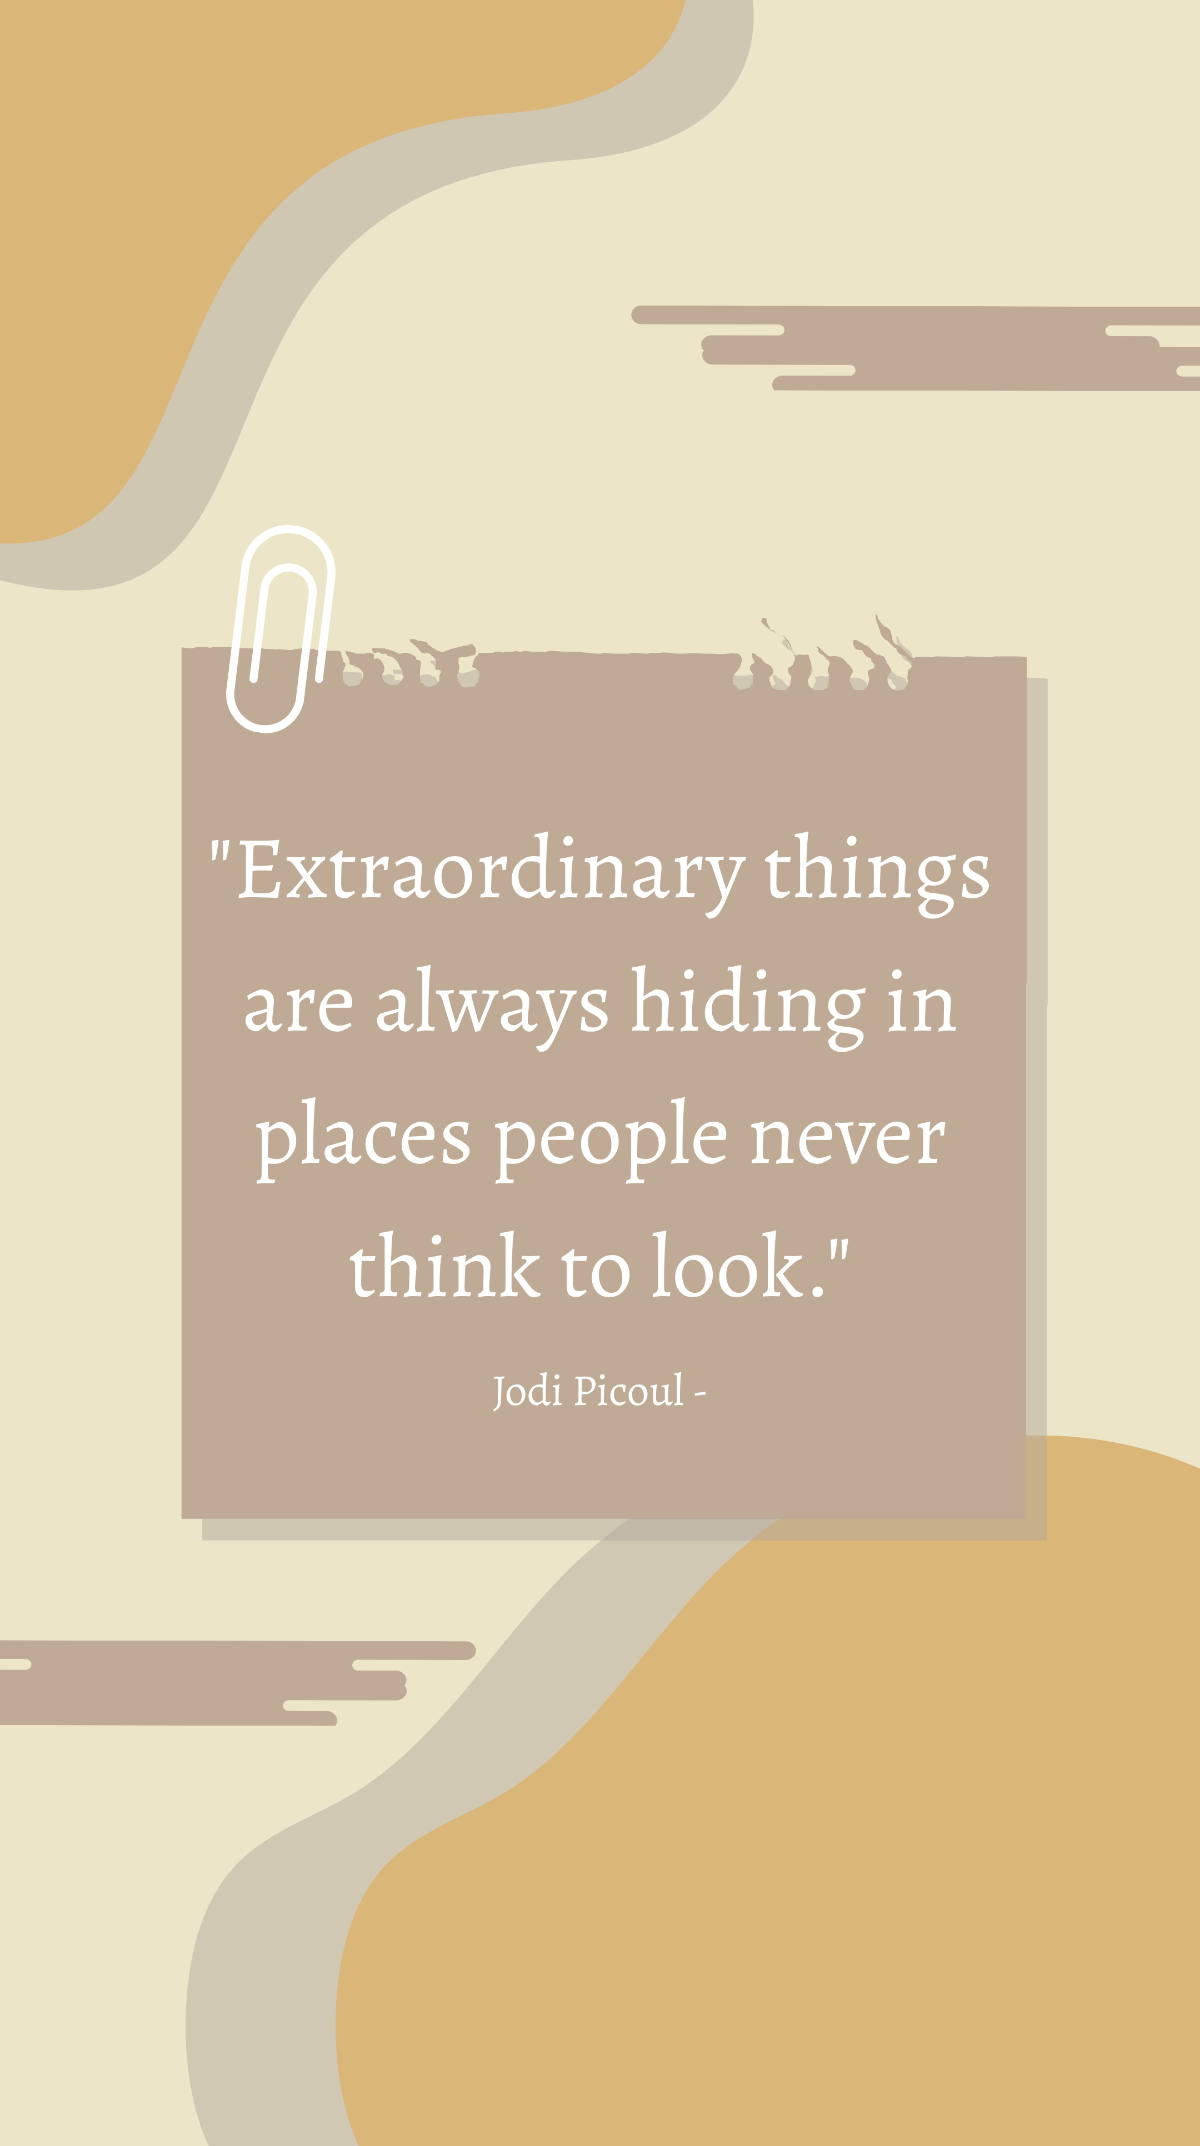 Jodi Picoul - Extraordinary things are always hiding in places people never think to look. Template